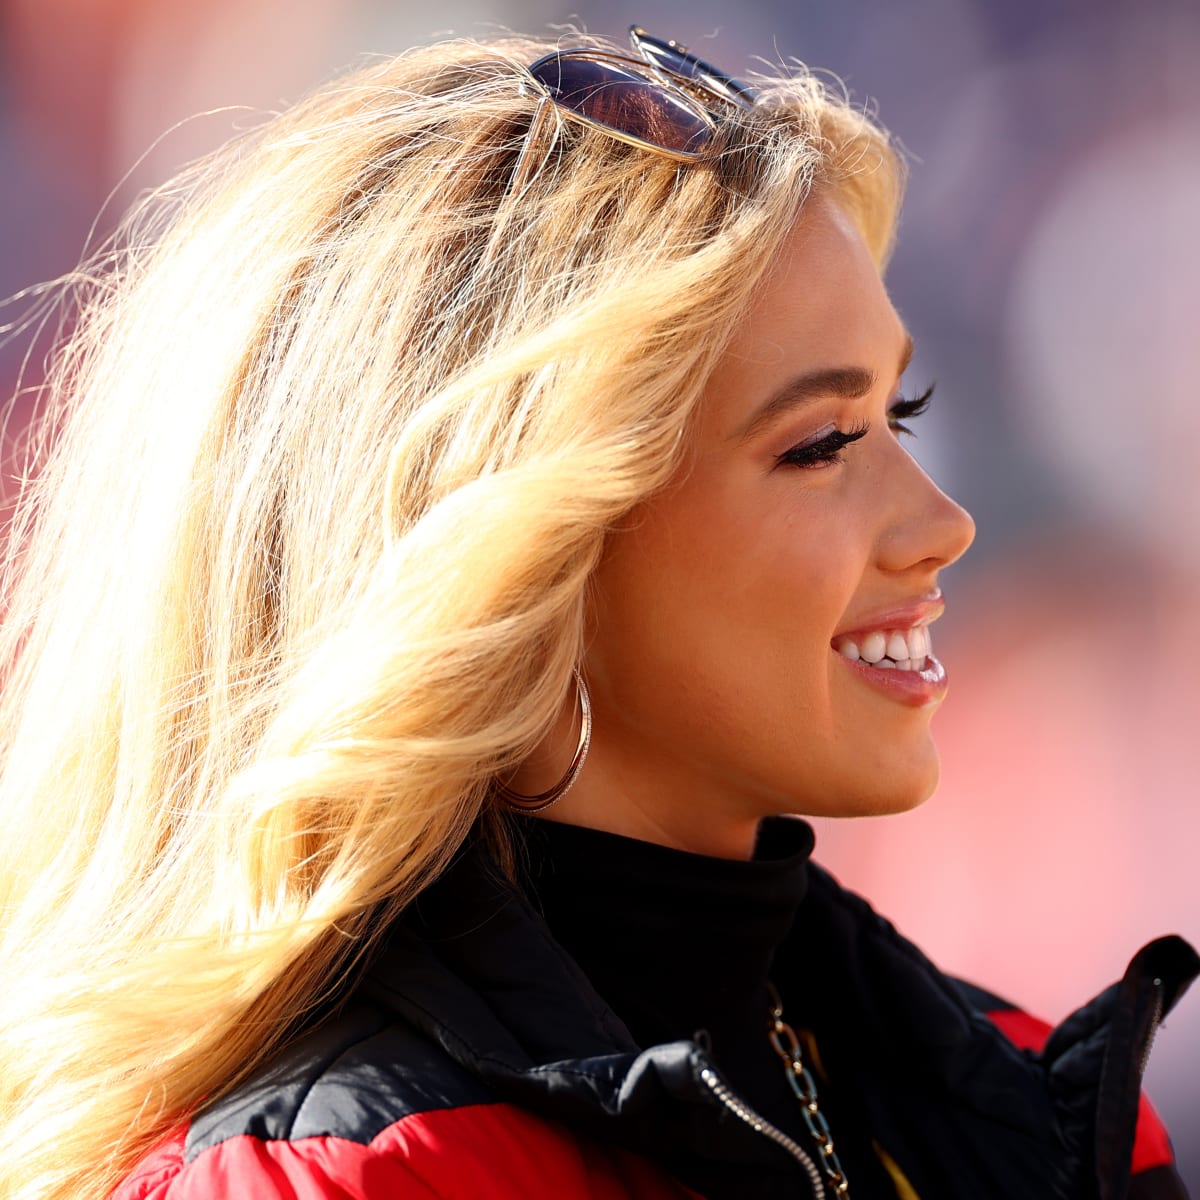 Chiefs Owner's Daughter Gracie Hunt Nods Sensual Glamour at Super Bowl – WWD